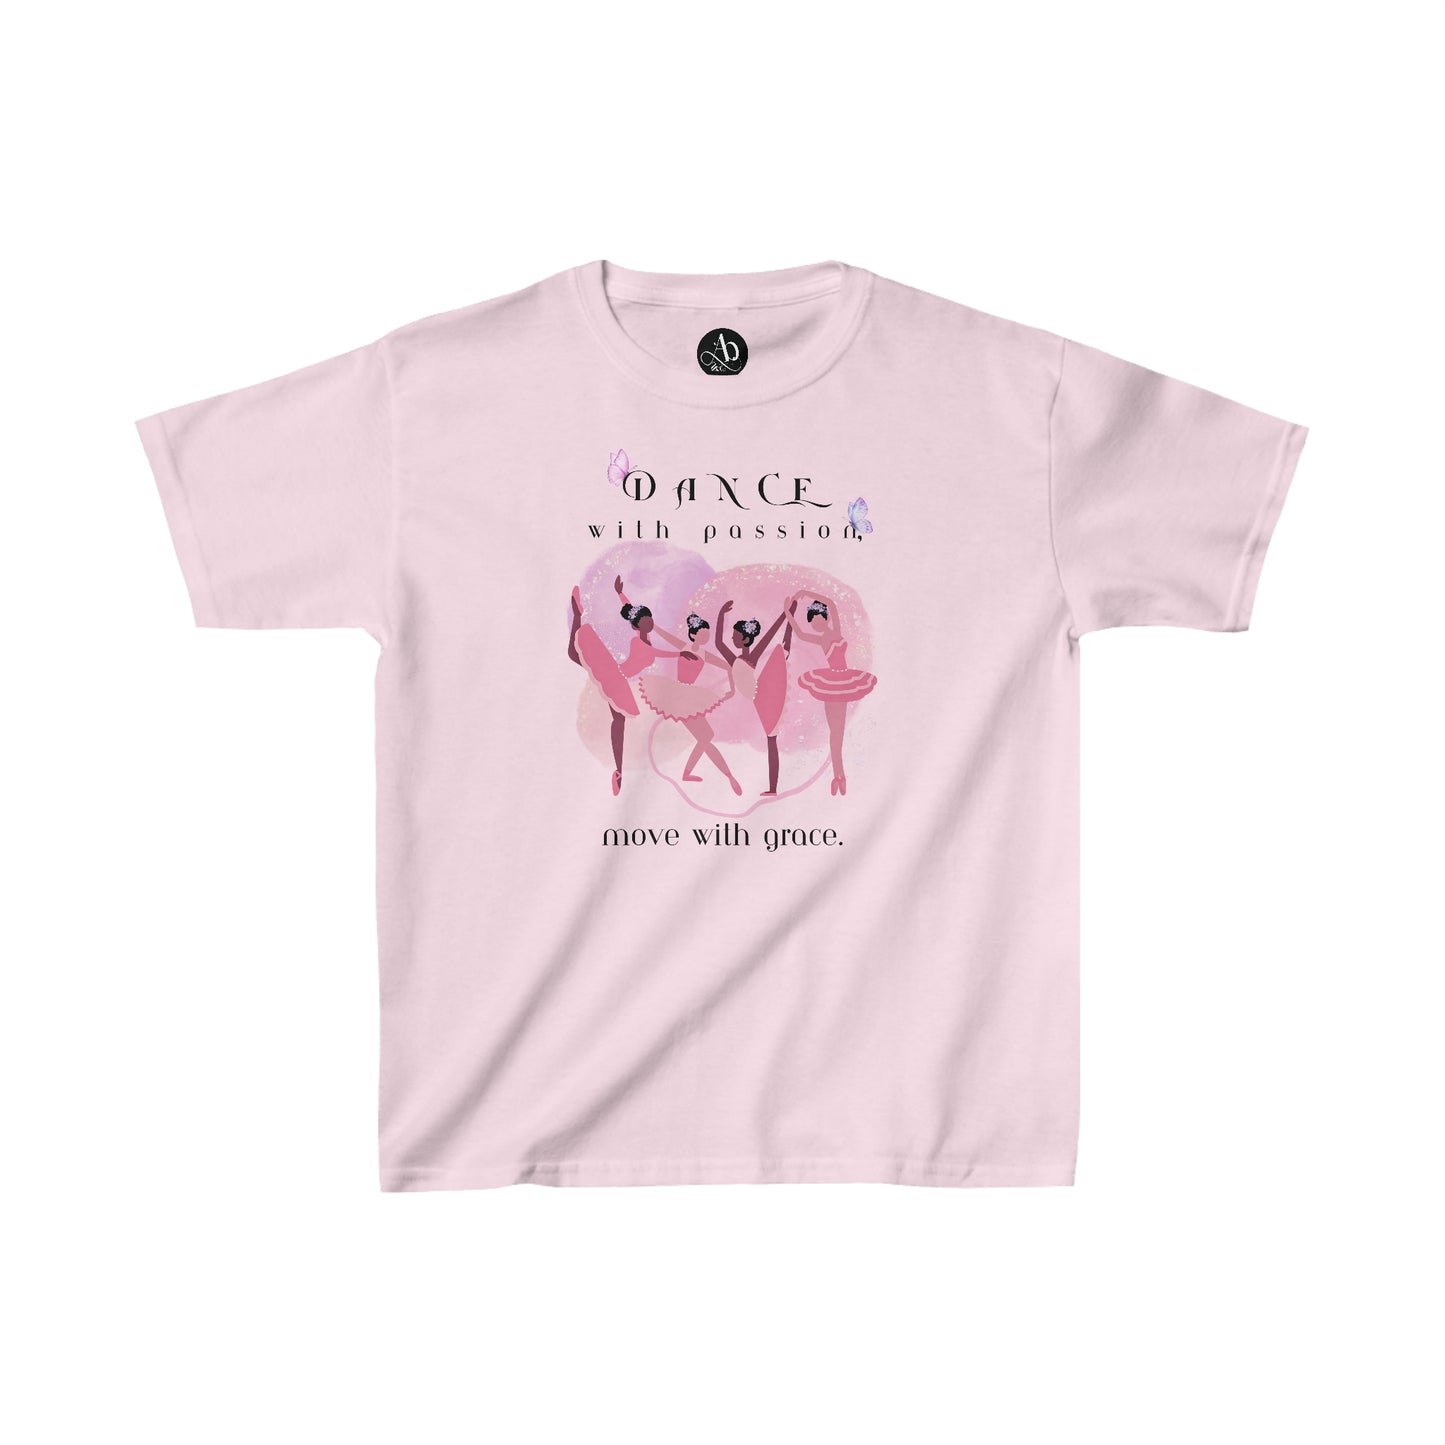 Kids Heavy Cotton™ Tee - Dance with passion - pink